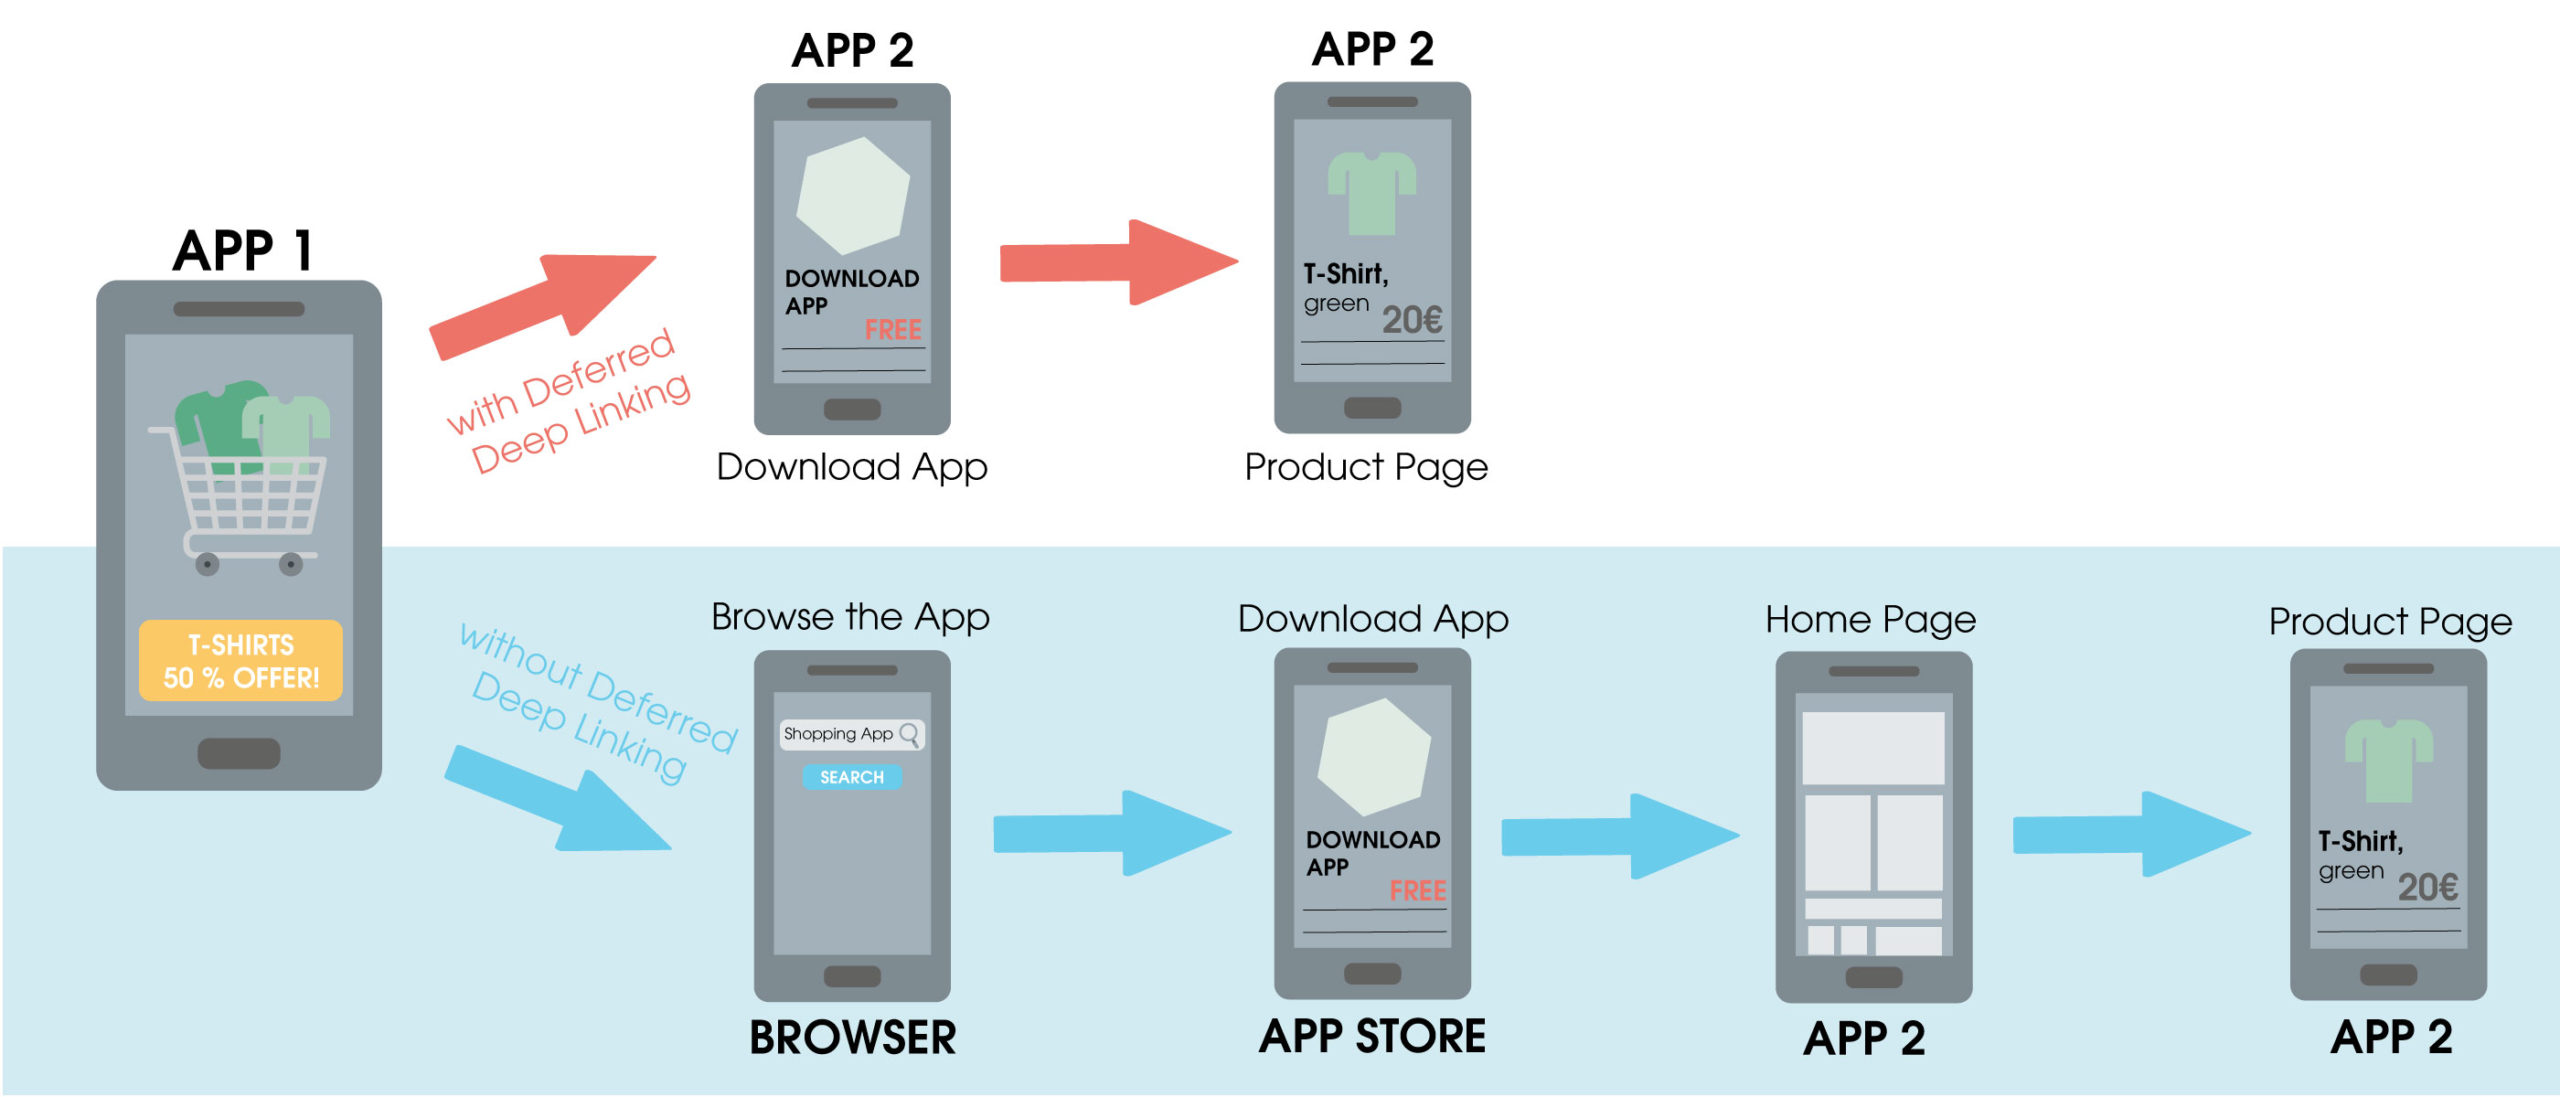 The graphic shows the function of an advertisement with and without deferred deep linking. In variant 1, the user lands directly in the app store after clicking, which forwards the user to the product page after download. This is an ad with deferred deep linking. With variant 2, on the other hand, the user must first search for the app in the browser, then download the app, and then fight his way through the home page to the product page. This is an ad without deferred deep linking.